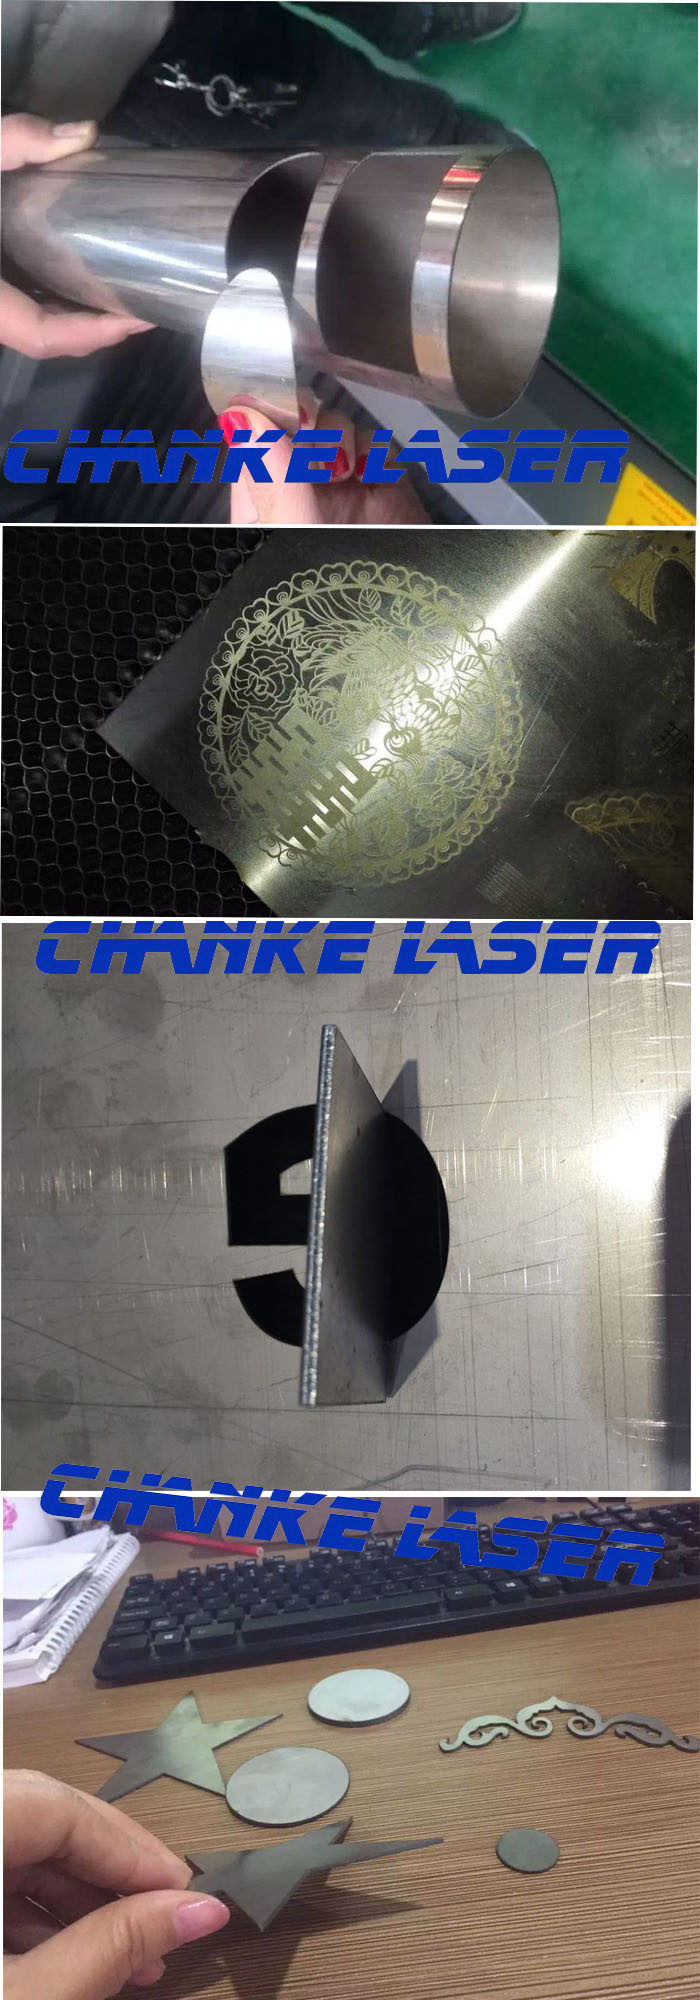 CNC CO2 Cutting Engraving Laser Machine for Acrylic/Paper /Metal